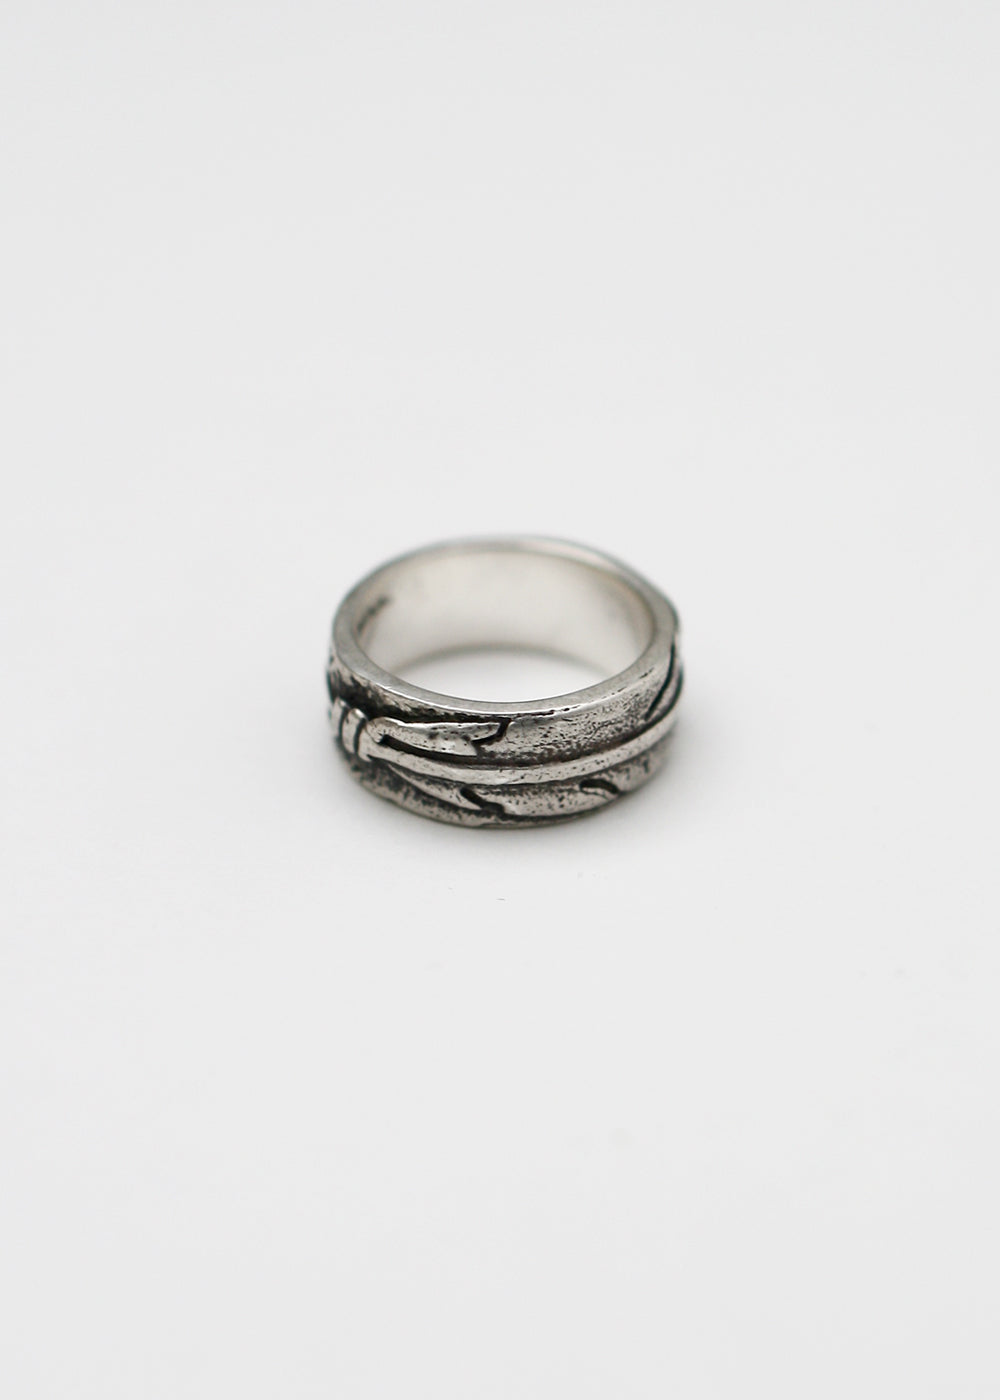 Vintage Sterling Silver One Feather Band Ring